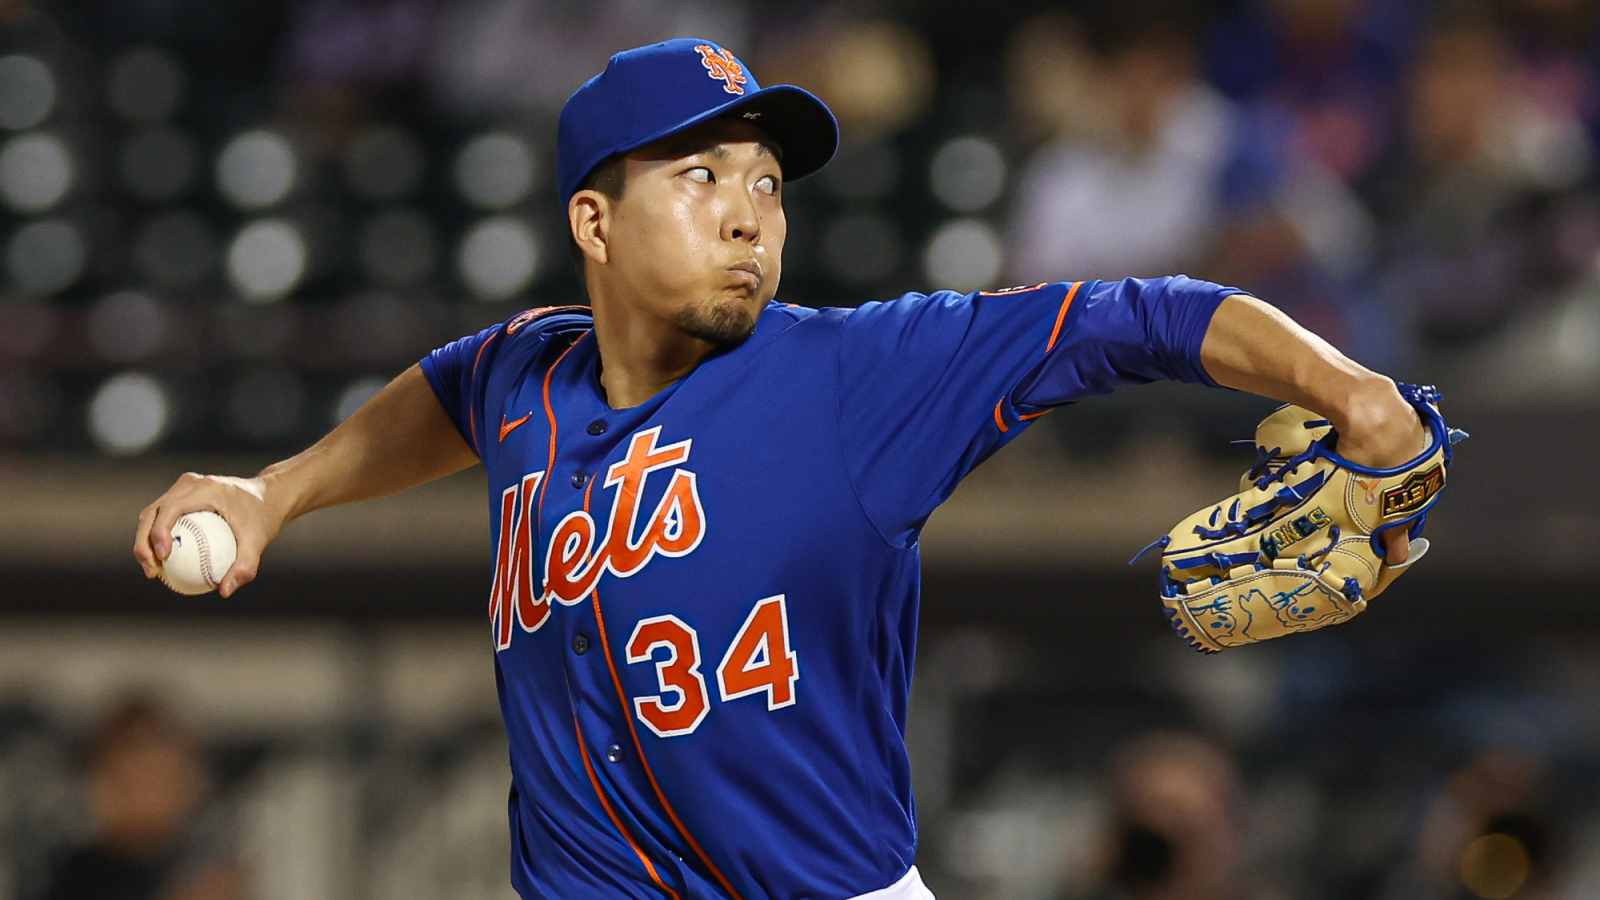 Are evaluators worried about Mets' Kodai Senga after rough rehab start?